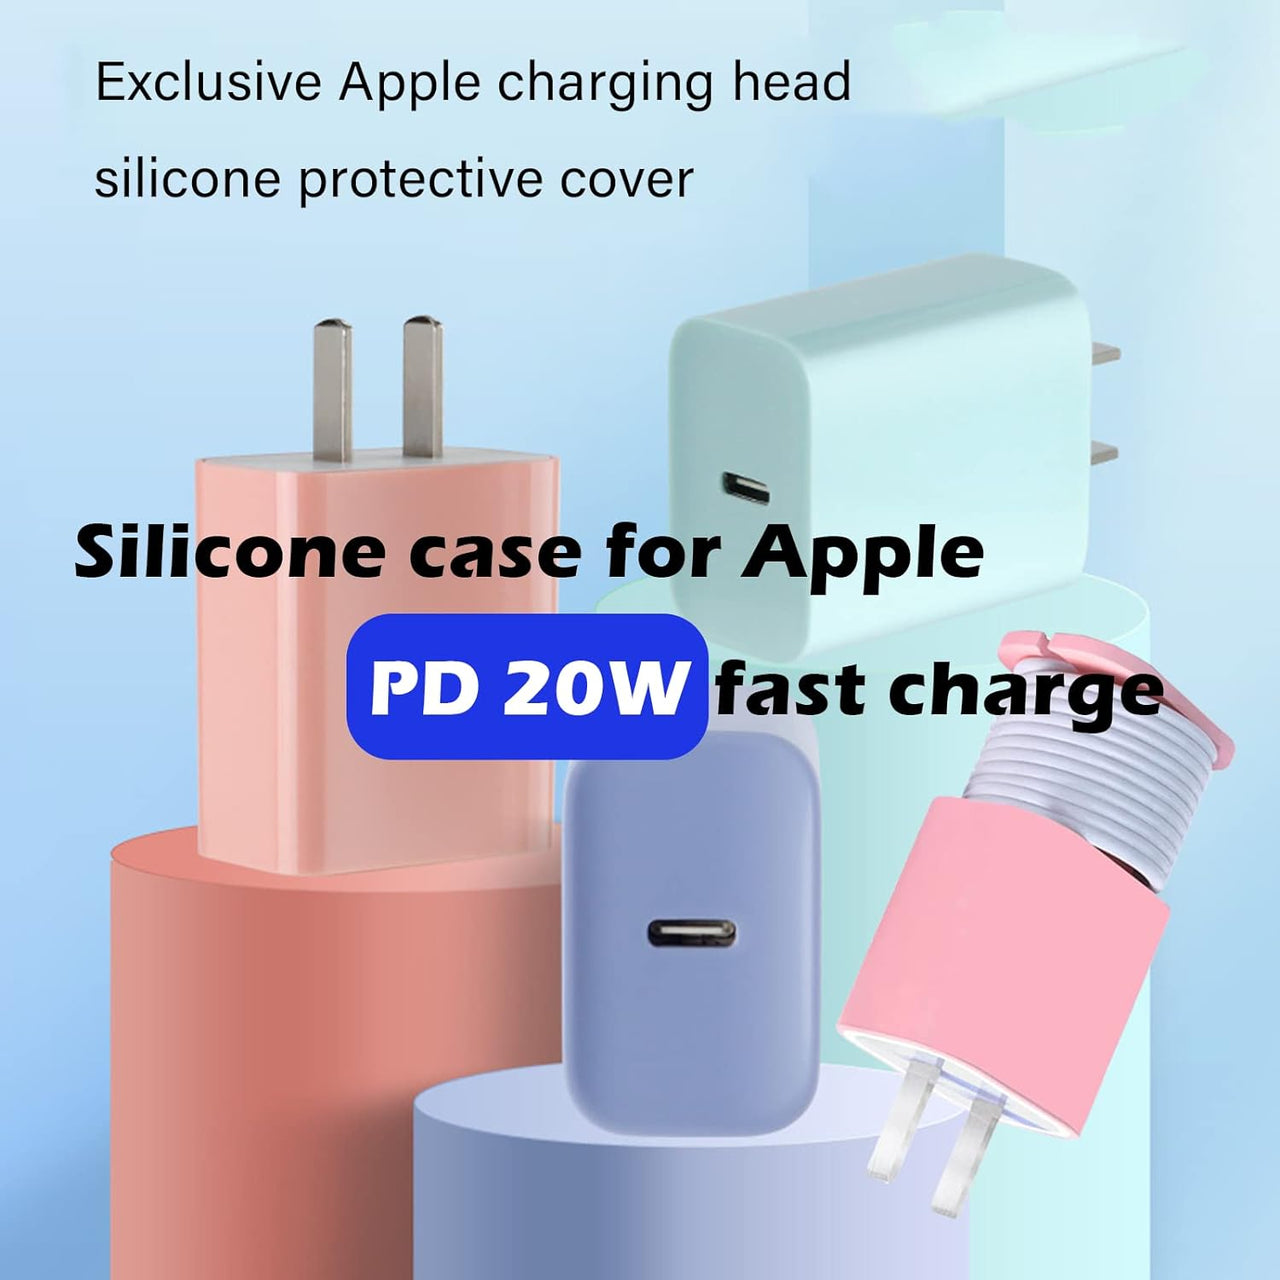 🔥LAST DAY SPECIAL SALE 60% OFF 🔥Silicone Charger Protector for iPhone